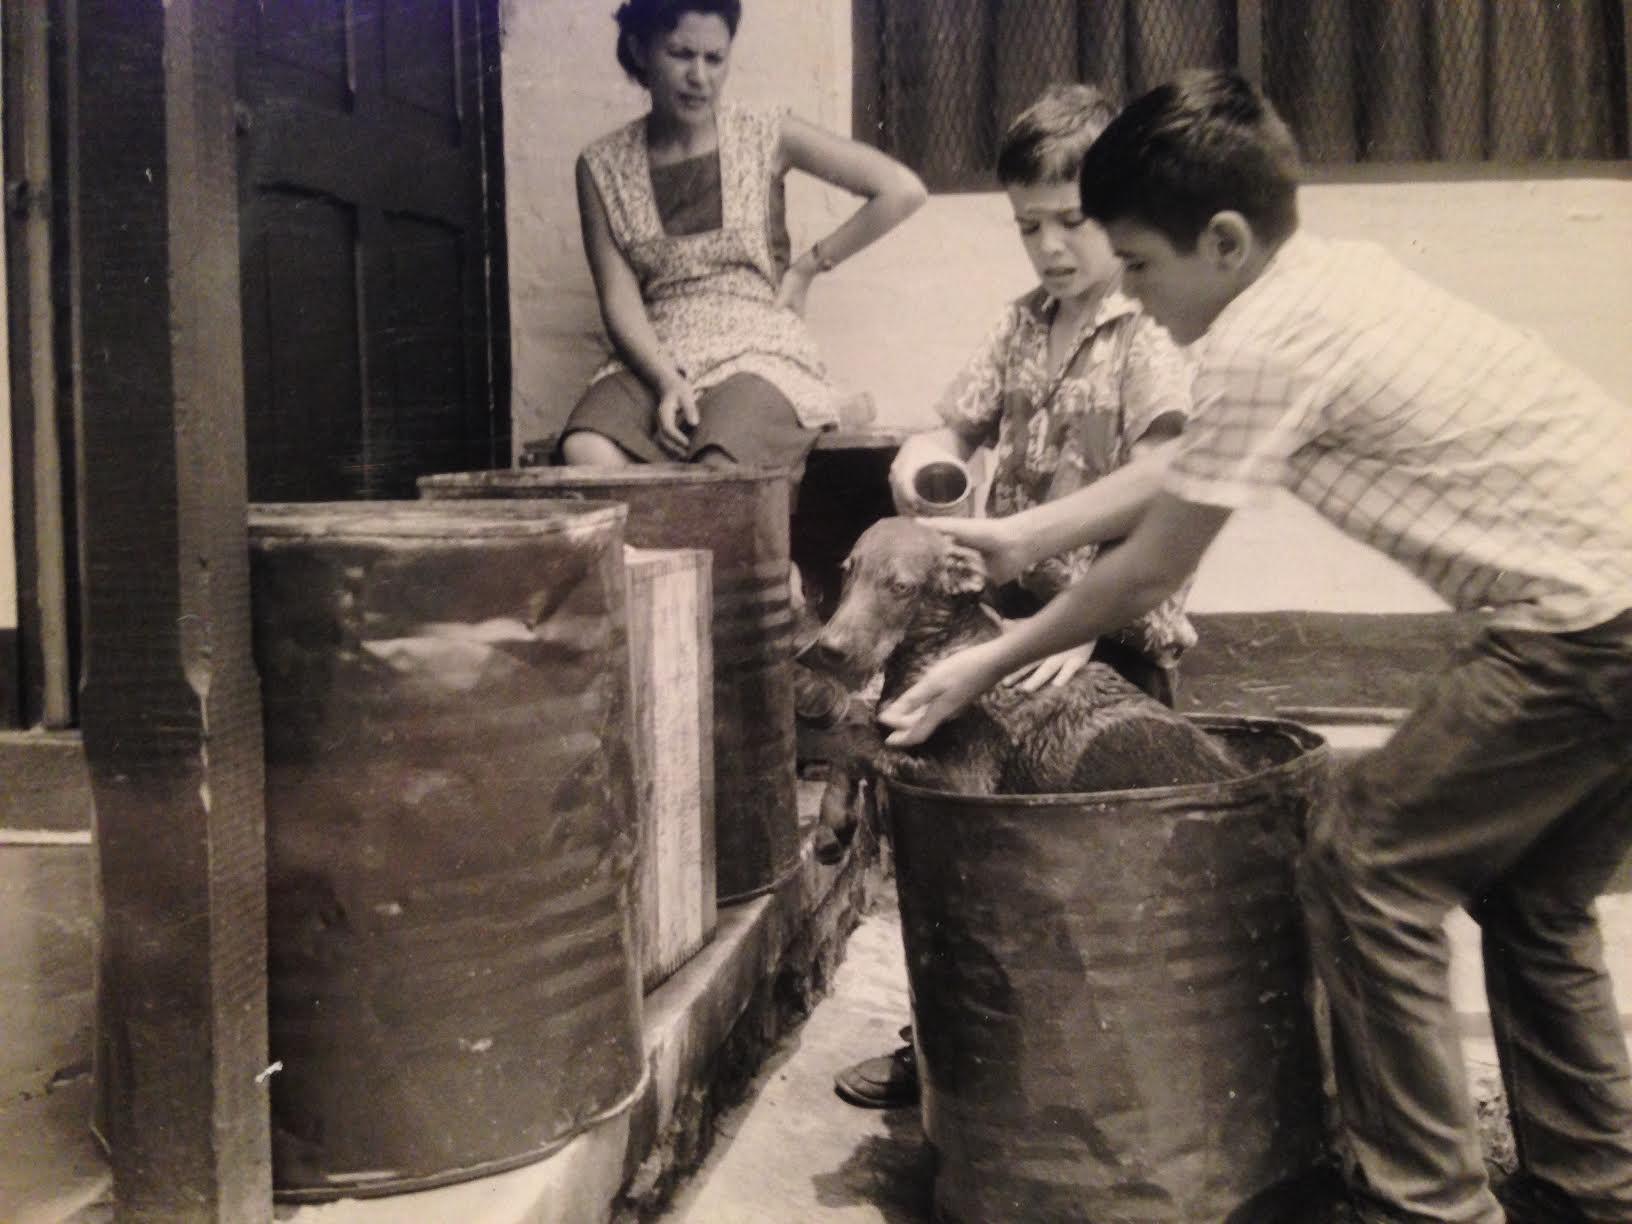 Brothers John and George Campbell wash their pet dog while their mother, Hortensia, watches. Photo taken in Segovia, Colombia.